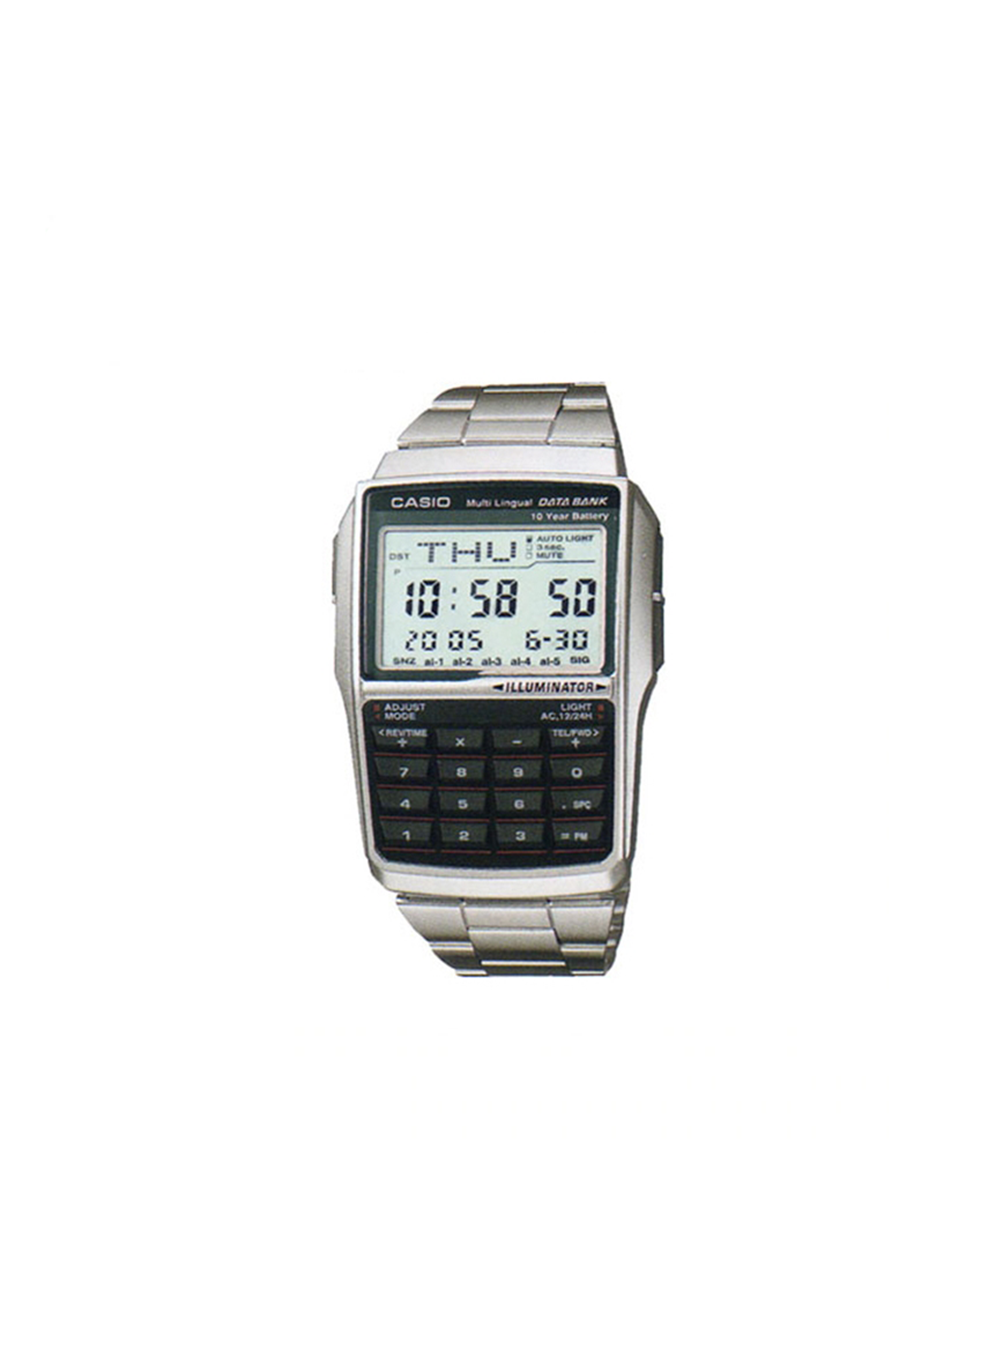 Retro Stainless Electronic wristwatch